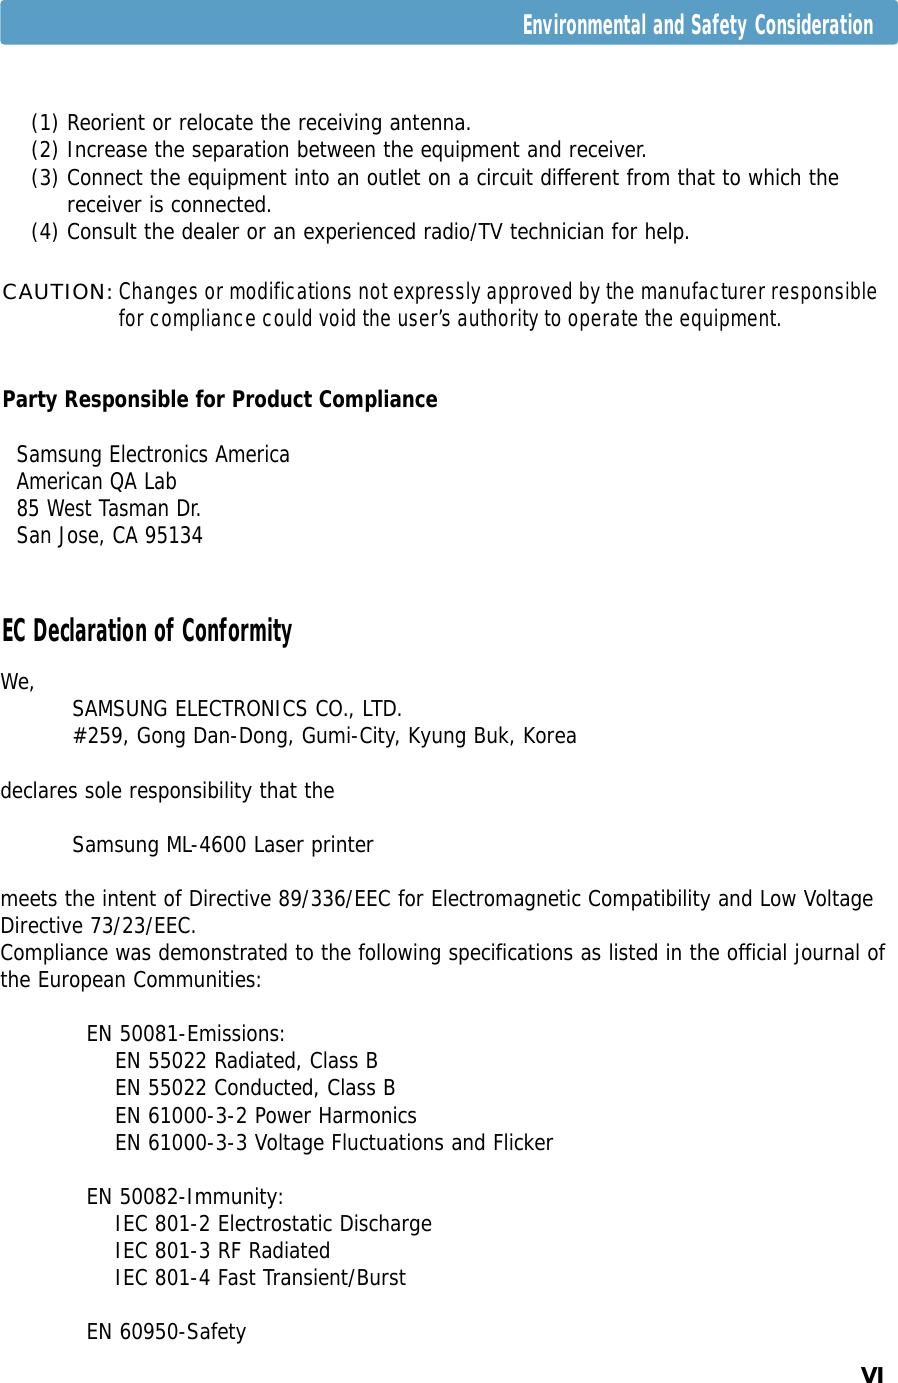 VIWe, SAMSUNG ELECTRONICS CO., LTD.#259, Gong Dan-Dong, Gumi-City, Kyung Buk, Koreadeclares sole responsibility that the Samsung ML-4600 Laser printermeets the intent of Directive 89/336/EEC for Electromagnetic Compatibility and Low VoltageDirective 73/23/EEC.Compliance was demonstrated to the following specifications as listed in the official journal ofthe European Communities:EN 50081-Emissions:EN 55022 Radiated, Class BEN 55022 Conducted, Class BEN 61000-3-2 Power HarmonicsEN 61000-3-3 Voltage Fluctuations and FlickerEN 50082-Immunity:IEC 801-2 Electrostatic DischargeIEC 801-3 RF RadiatedIEC 801-4 Fast Transient/BurstEN 60950-SafetyEC Declaration of Conformity(1) Reorient or relocate the receiving antenna.(2) Increase the separation between the equipment and receiver.(3) Connect the equipment into an outlet on a circuit different from that to which thereceiver is connected.(4) Consult the dealer or an experienced radio/TV technician for help.CAUTION: Changes or modifications not expressly approved by the manufacturer responsiblefor compliance could void the user’s authority to operate the equipment.Party Responsible for Product ComplianceSamsung Electronics AmericaAmerican QA Lab85 West Tasman Dr.San Jose, CA 95134Environmental and Safety Consideration